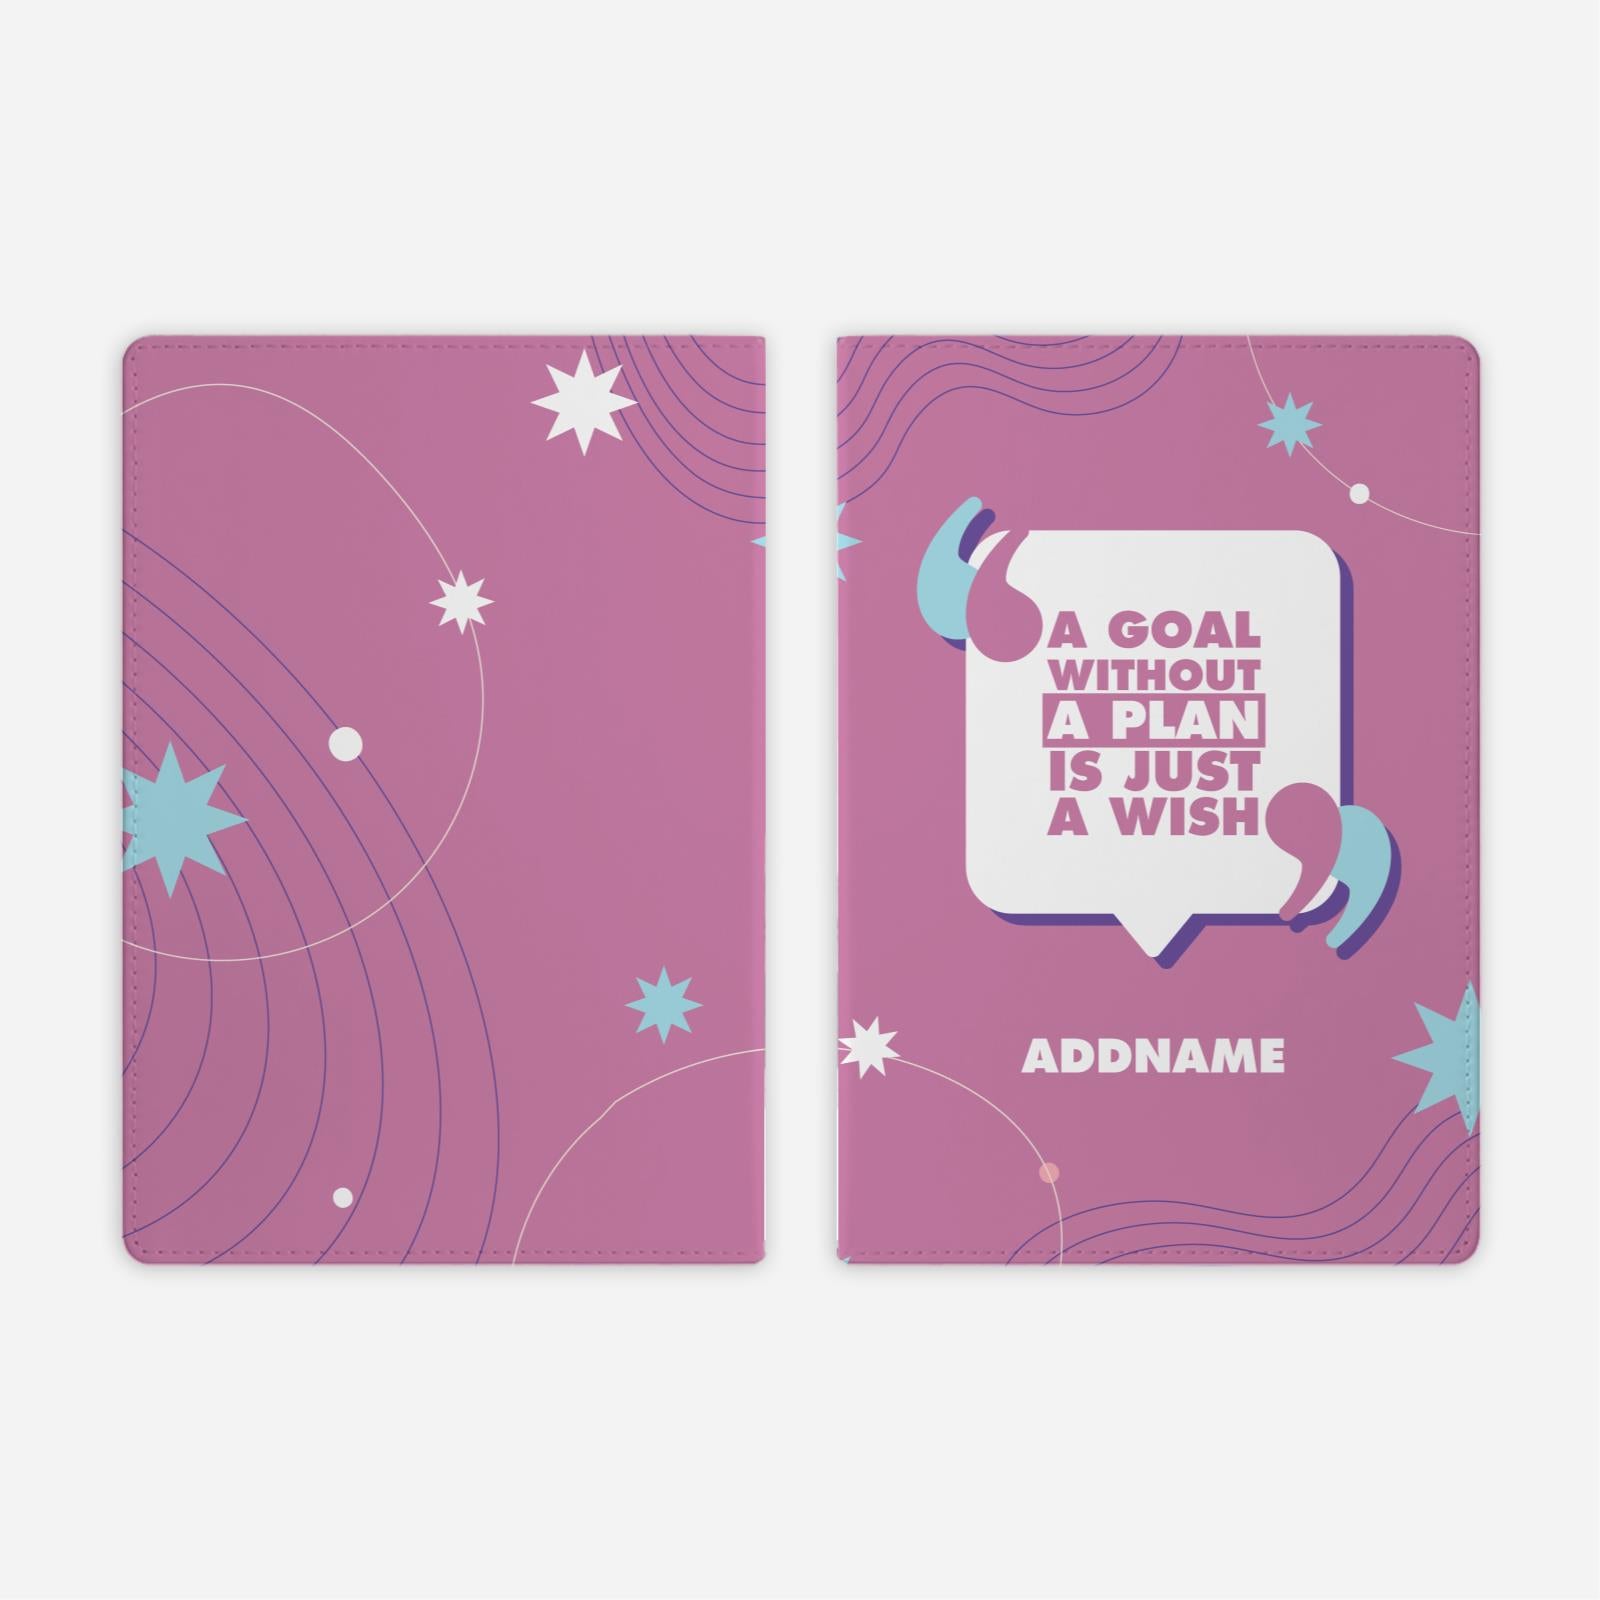 Be Confident Series Full Print Cover Notebook - A Goal Without a Plan Is Just A Wish - Pink